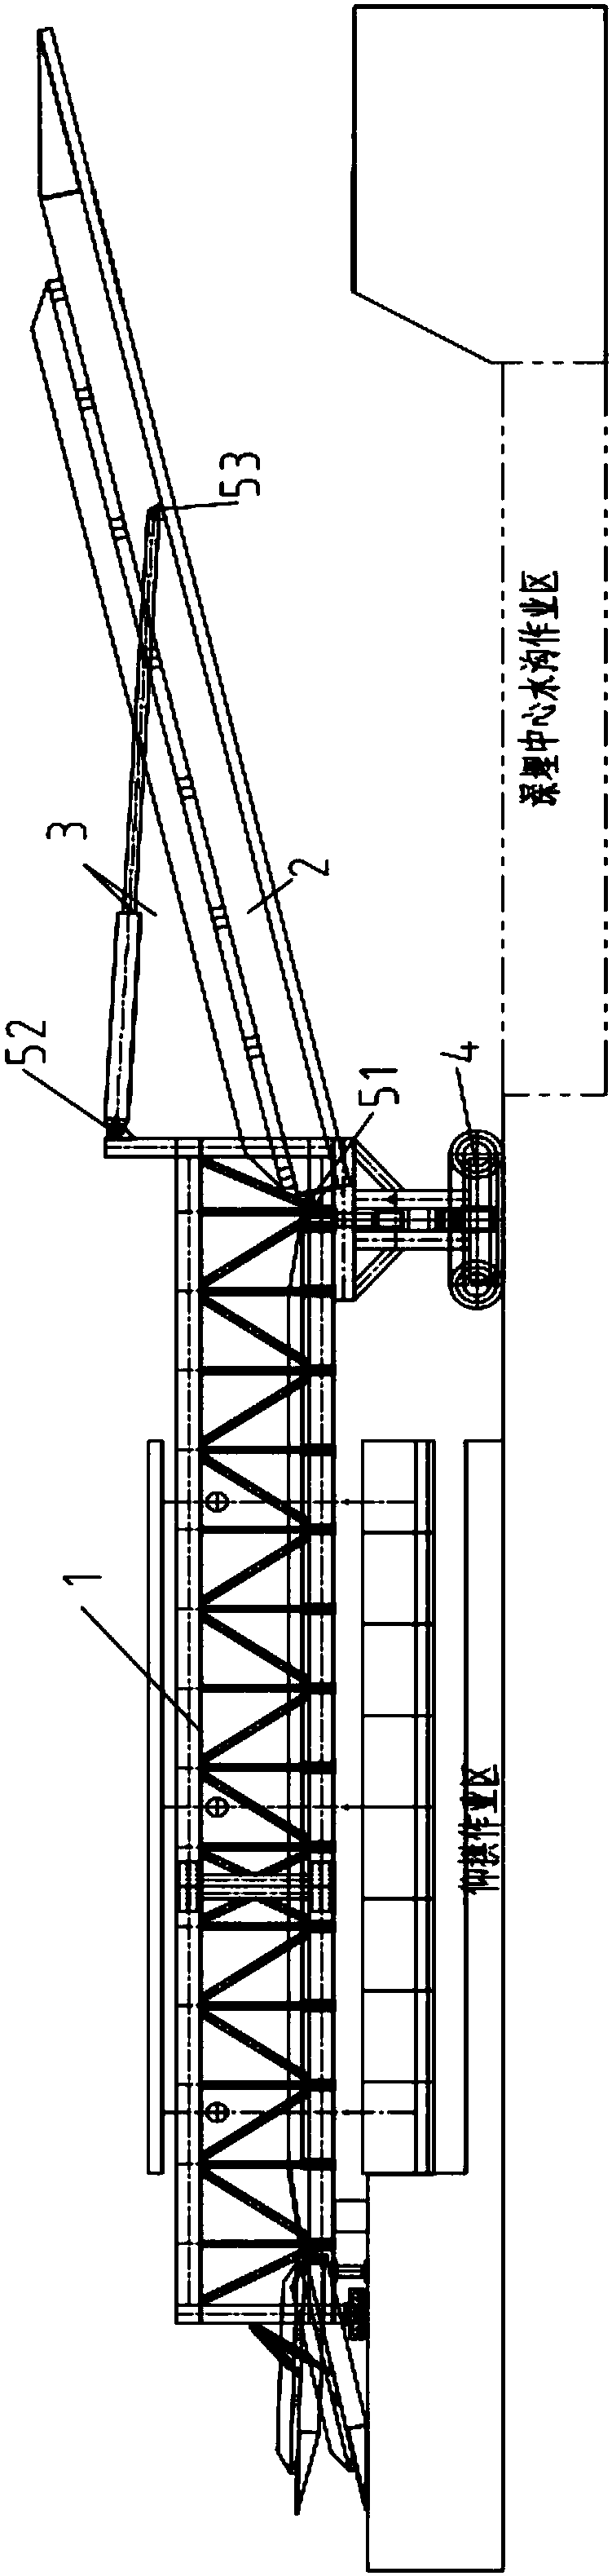 Self-propelled lifting composite trestle for tunnel deep-buried ditch construction